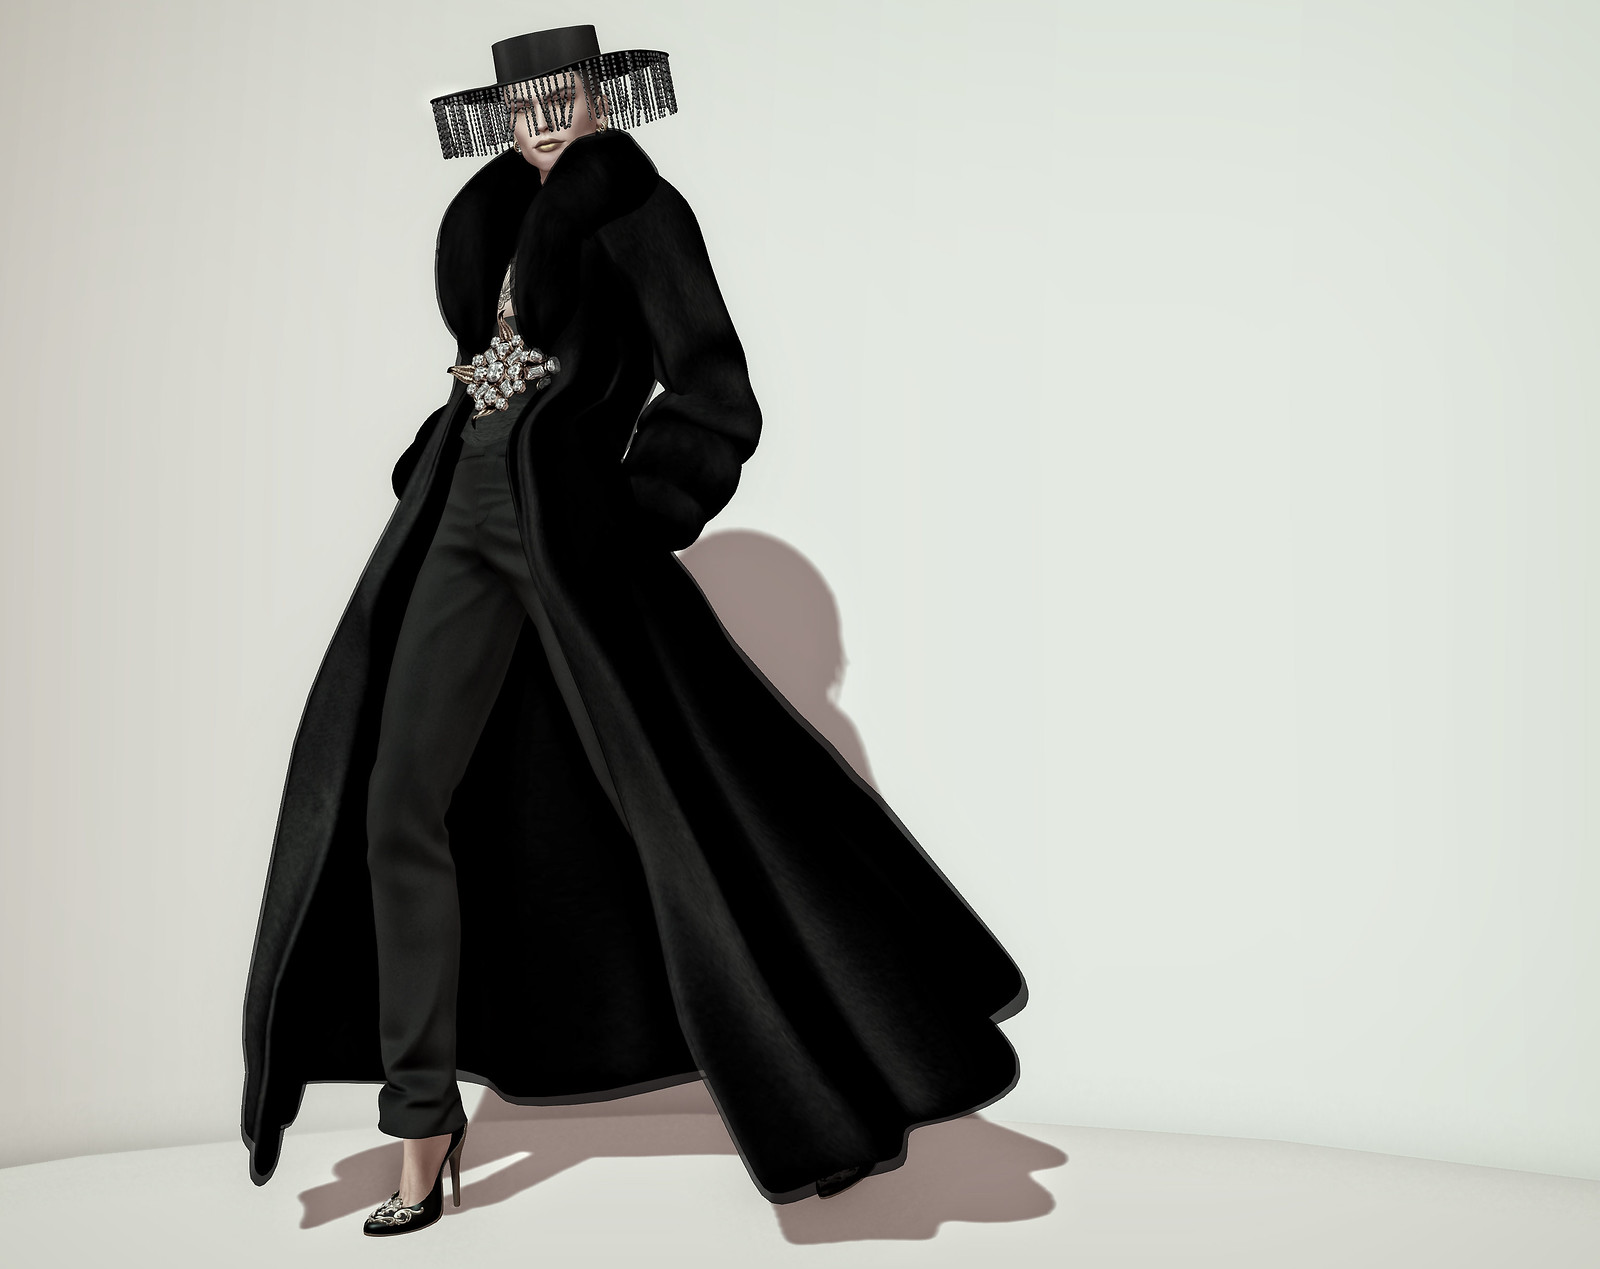 A man in a catwalk pose, wearing a long black fur coat and fitted black pants. A wide-brimmed hat is on his head; with strings of black crystal beads dangling down all around the edge of the brim. At his waist he has a highly-embellished short black satin corset with a wide, over-the-top rose gold metal flower surmounted by lots of large clear crystal gems. On his feet he wears black high heels with rose gold metal ornamentation on the toes. He's wearing shimmering gold lipstick that matches the metal ornamentation.